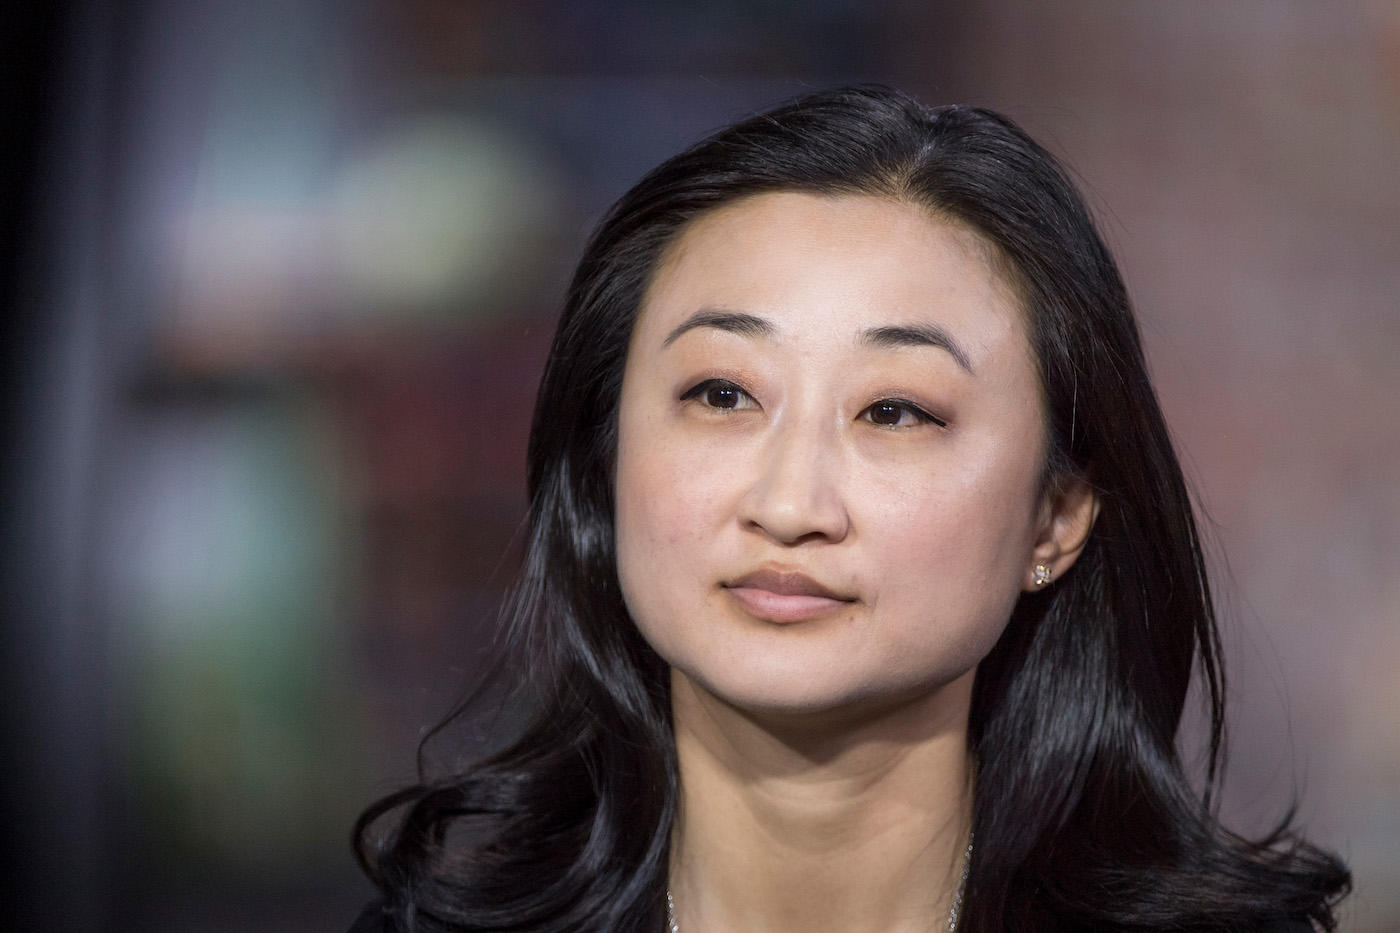 Christine Tsai, co-founder and chief executive officer of 500 Startups Management Co., listens during a Bloomberg Technology Television interview in San Francisco, California, U.S., on Tuesday, June 12, 2018. Tsai discussed Abu Dhabi Financial Group's stake in the company as well as international expansion and running the firm after co-founder Dave McClure's departure. Photographer: David Paul Morris/Bloomberg